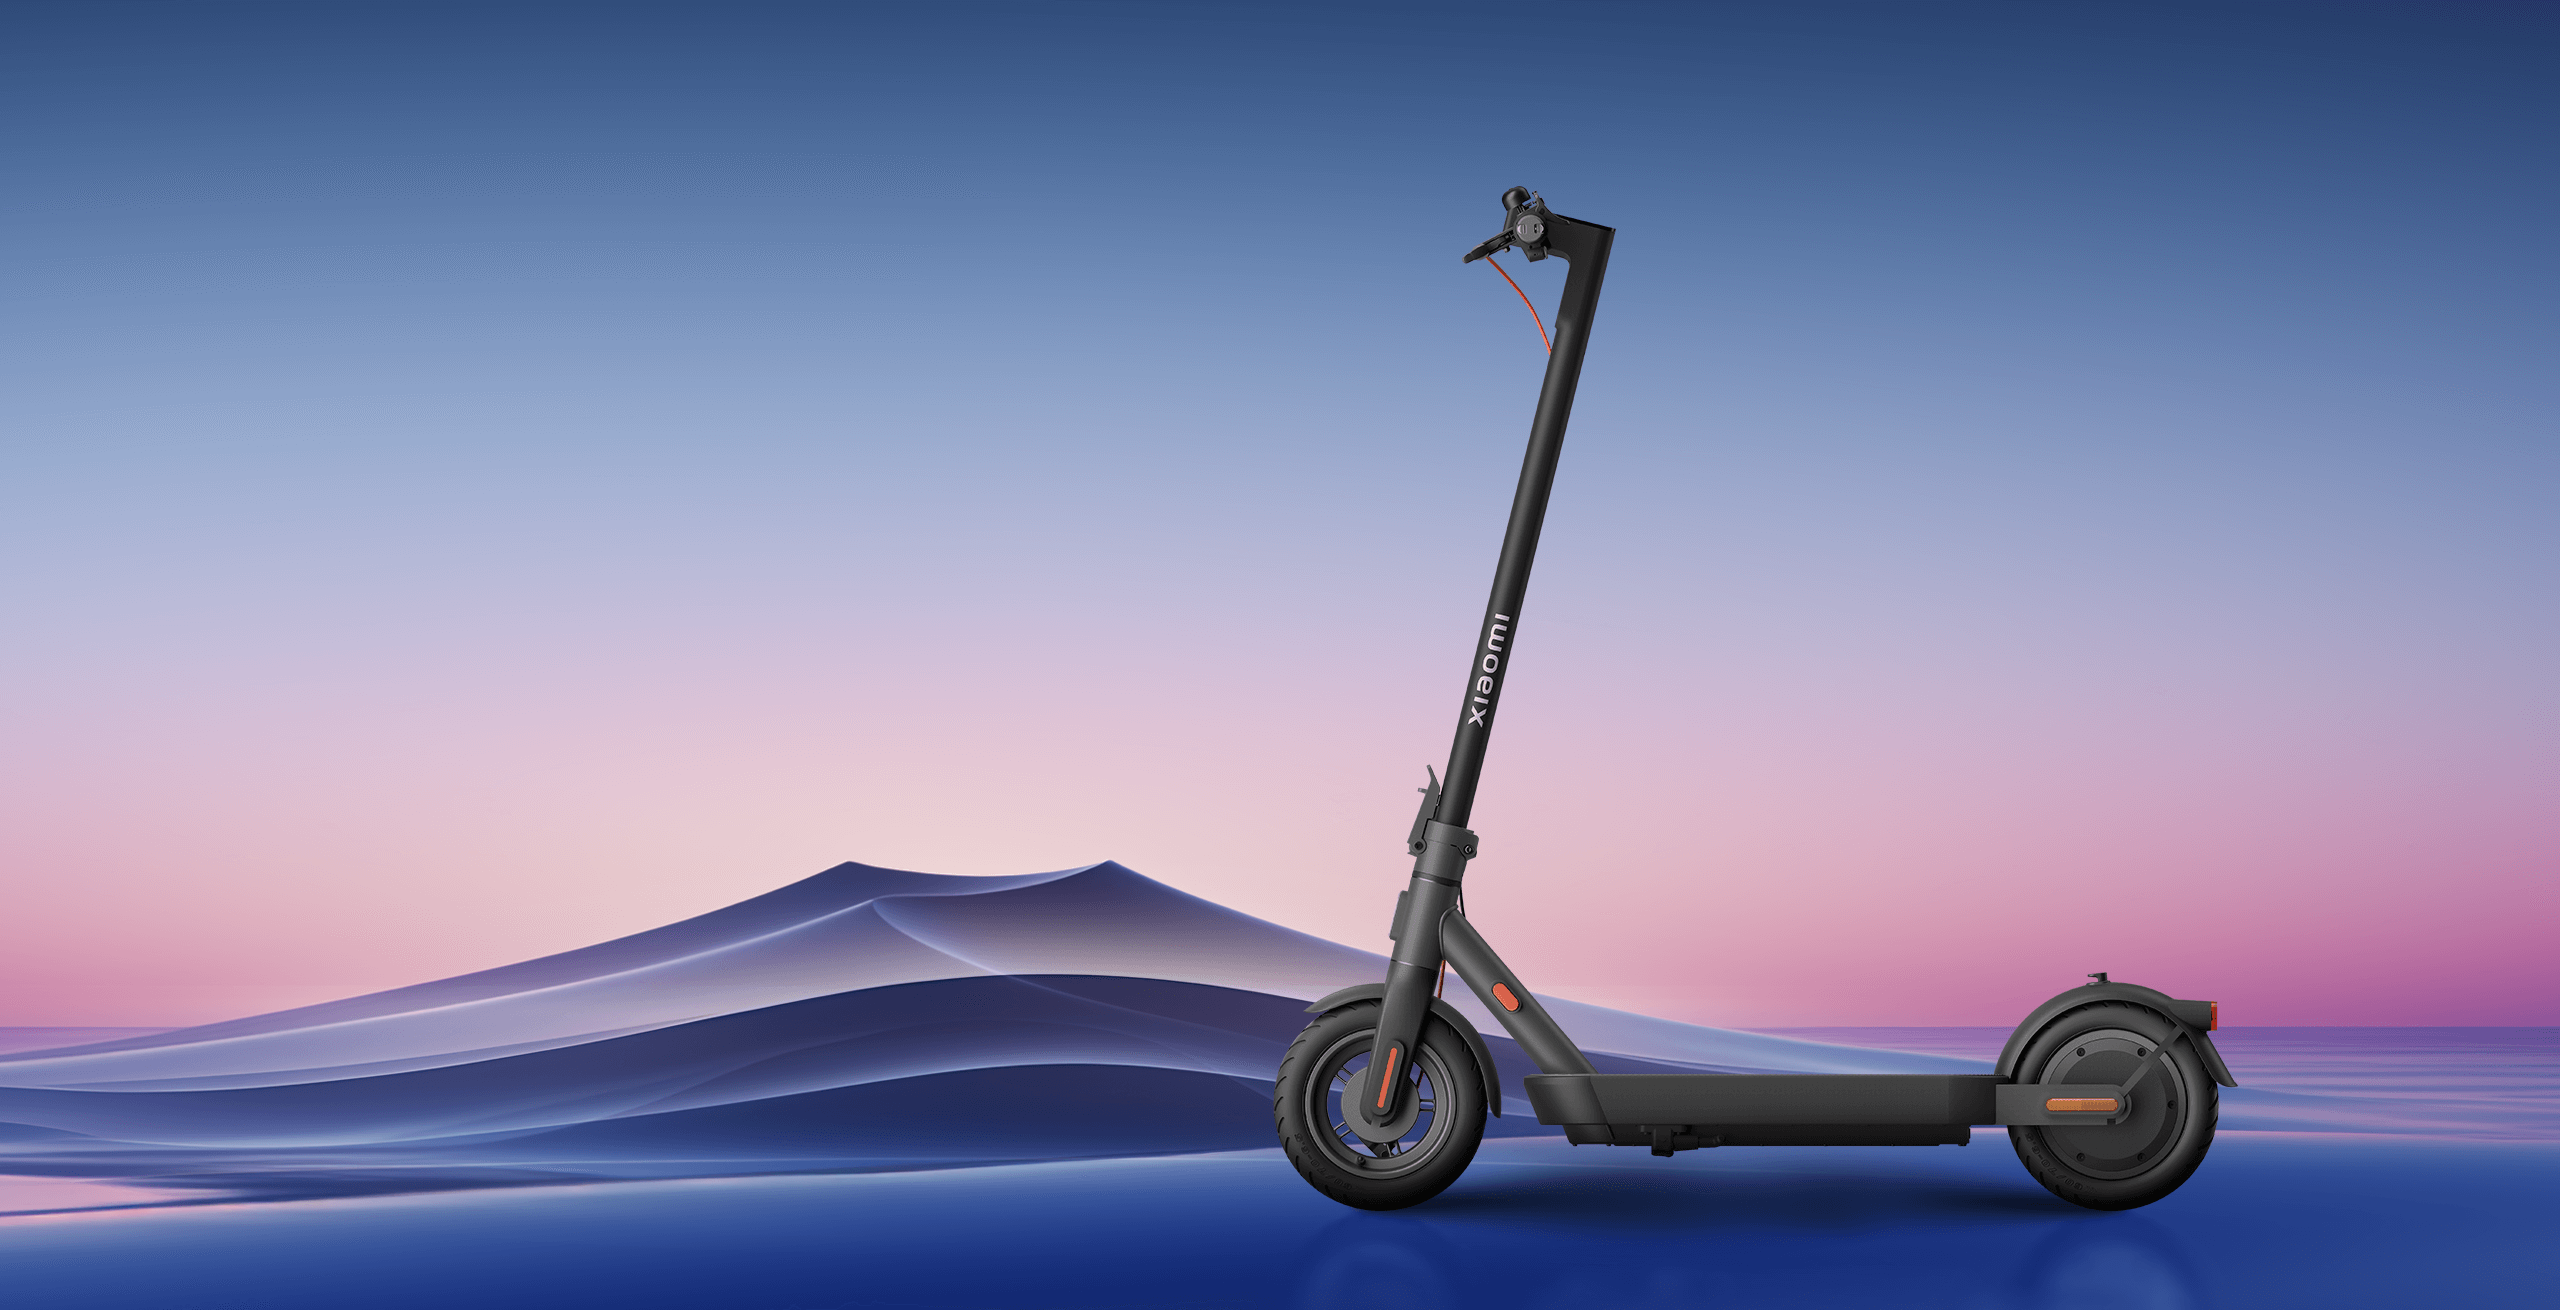 Xiaomi Electric Scooter 4 Pro 2nd Gen